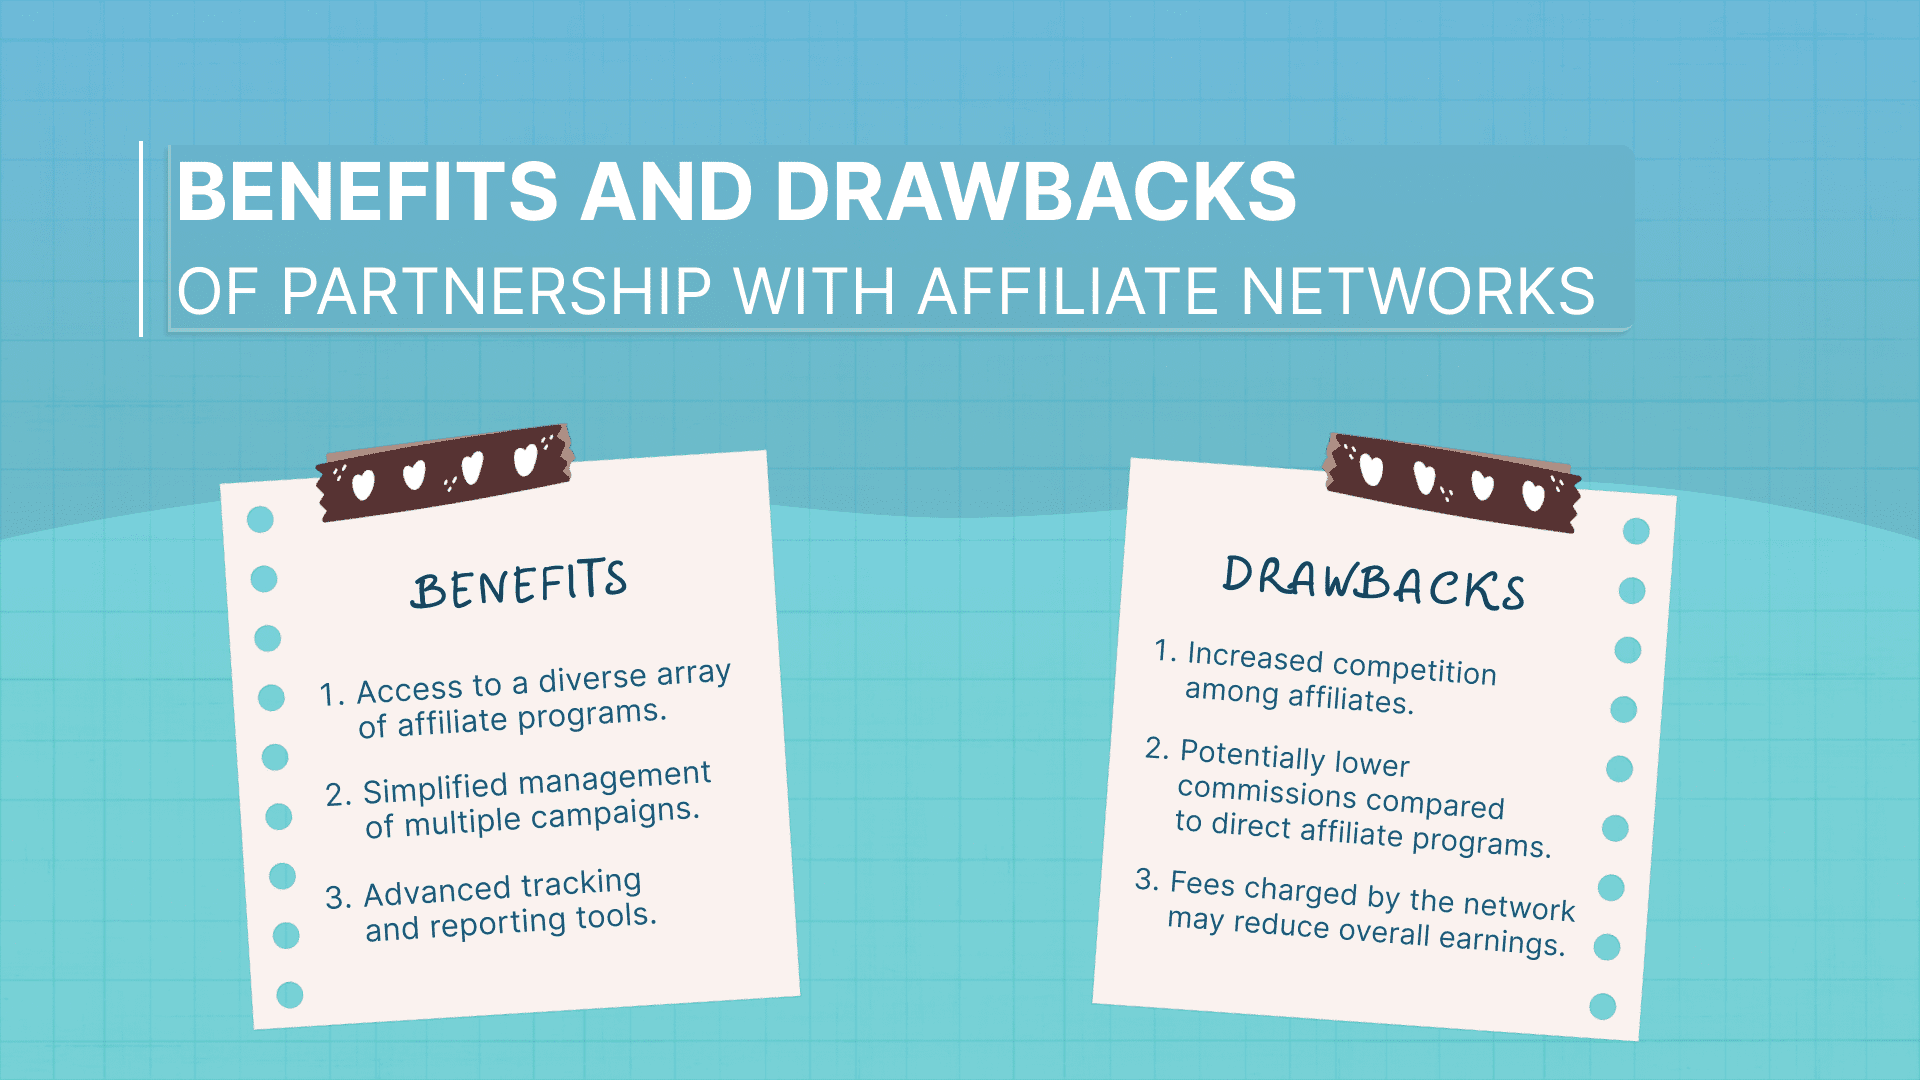 Ad Network vs. Affiliate Network: Maximize Your Digital Marketing Strategy